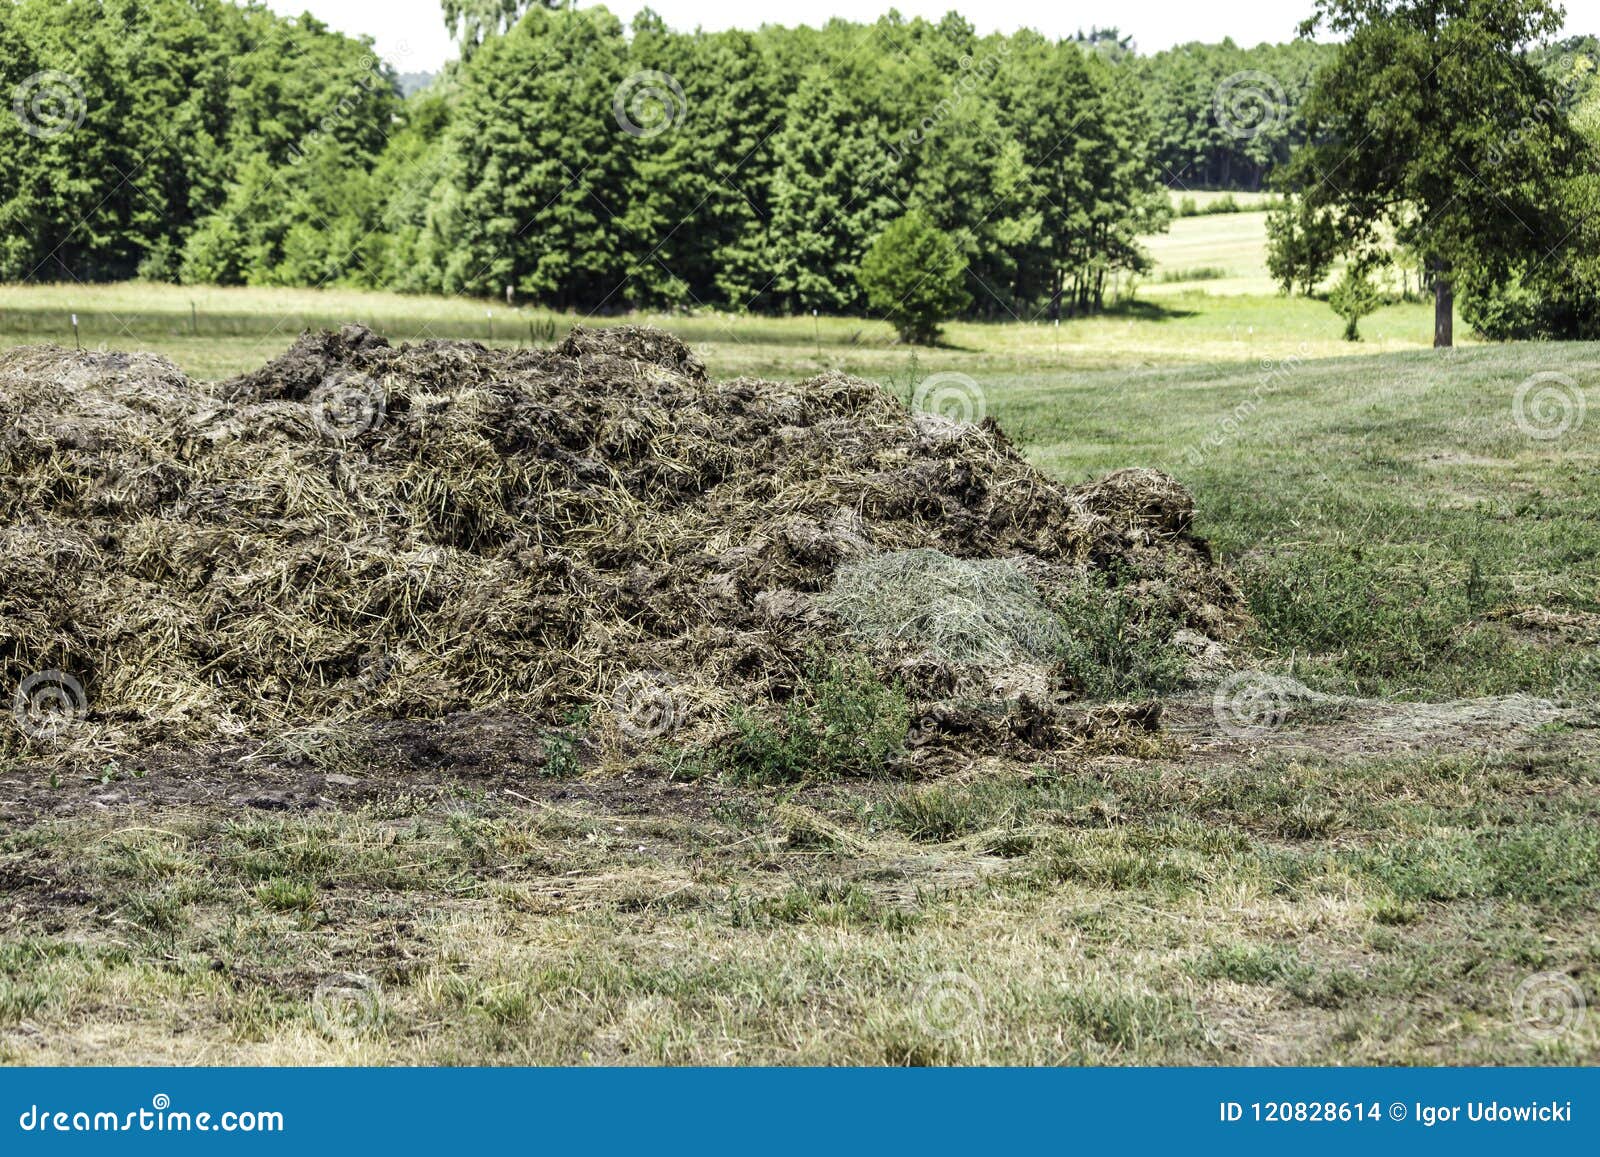 Fertilizer From Cow Manure And Straw Stock Photo Image Of Bull